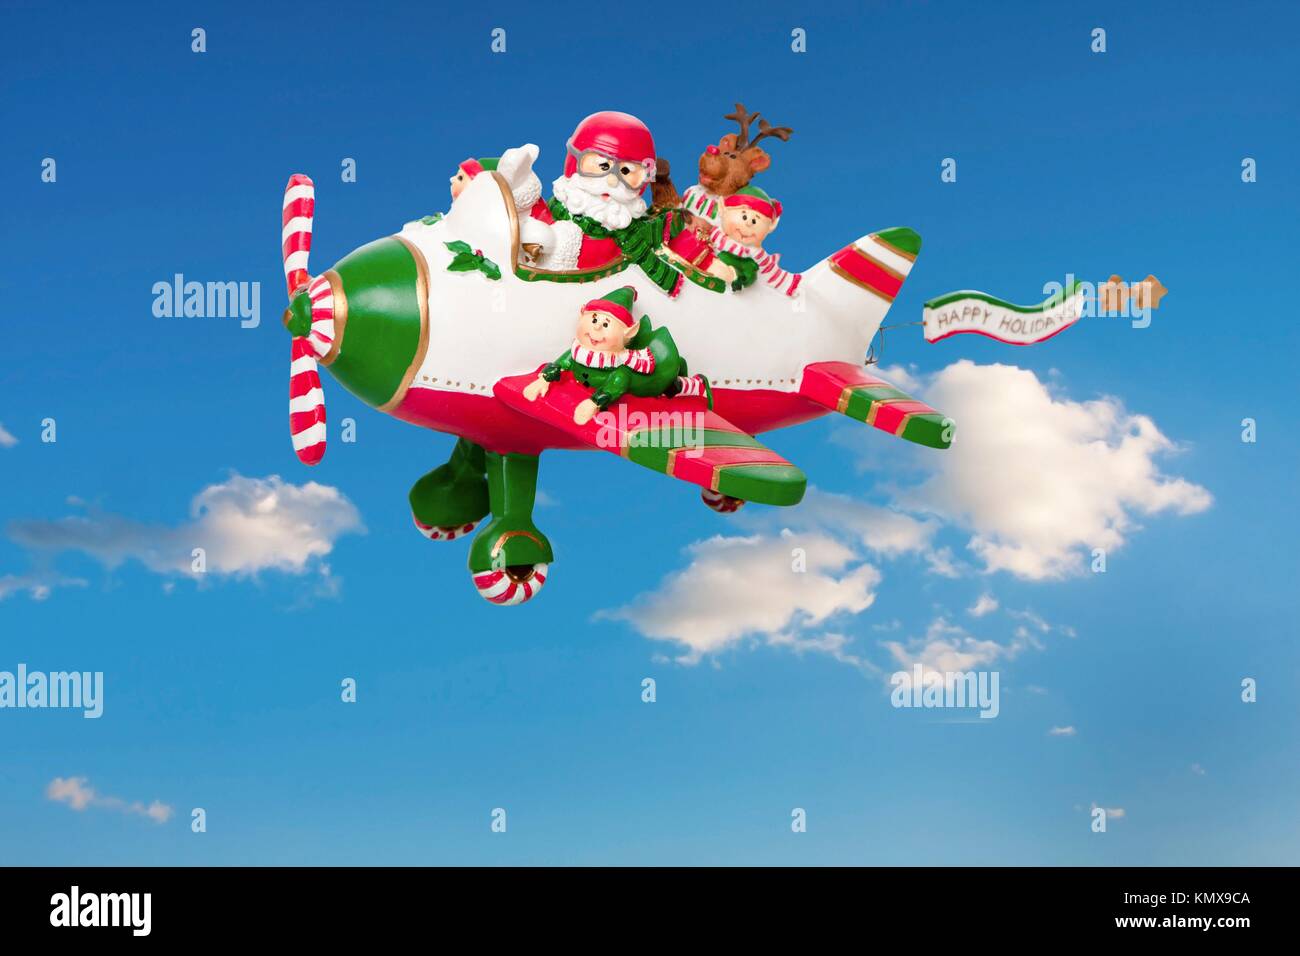 Santa Claus flying his airplane with Happy Holidays banner in the sky with his elves and